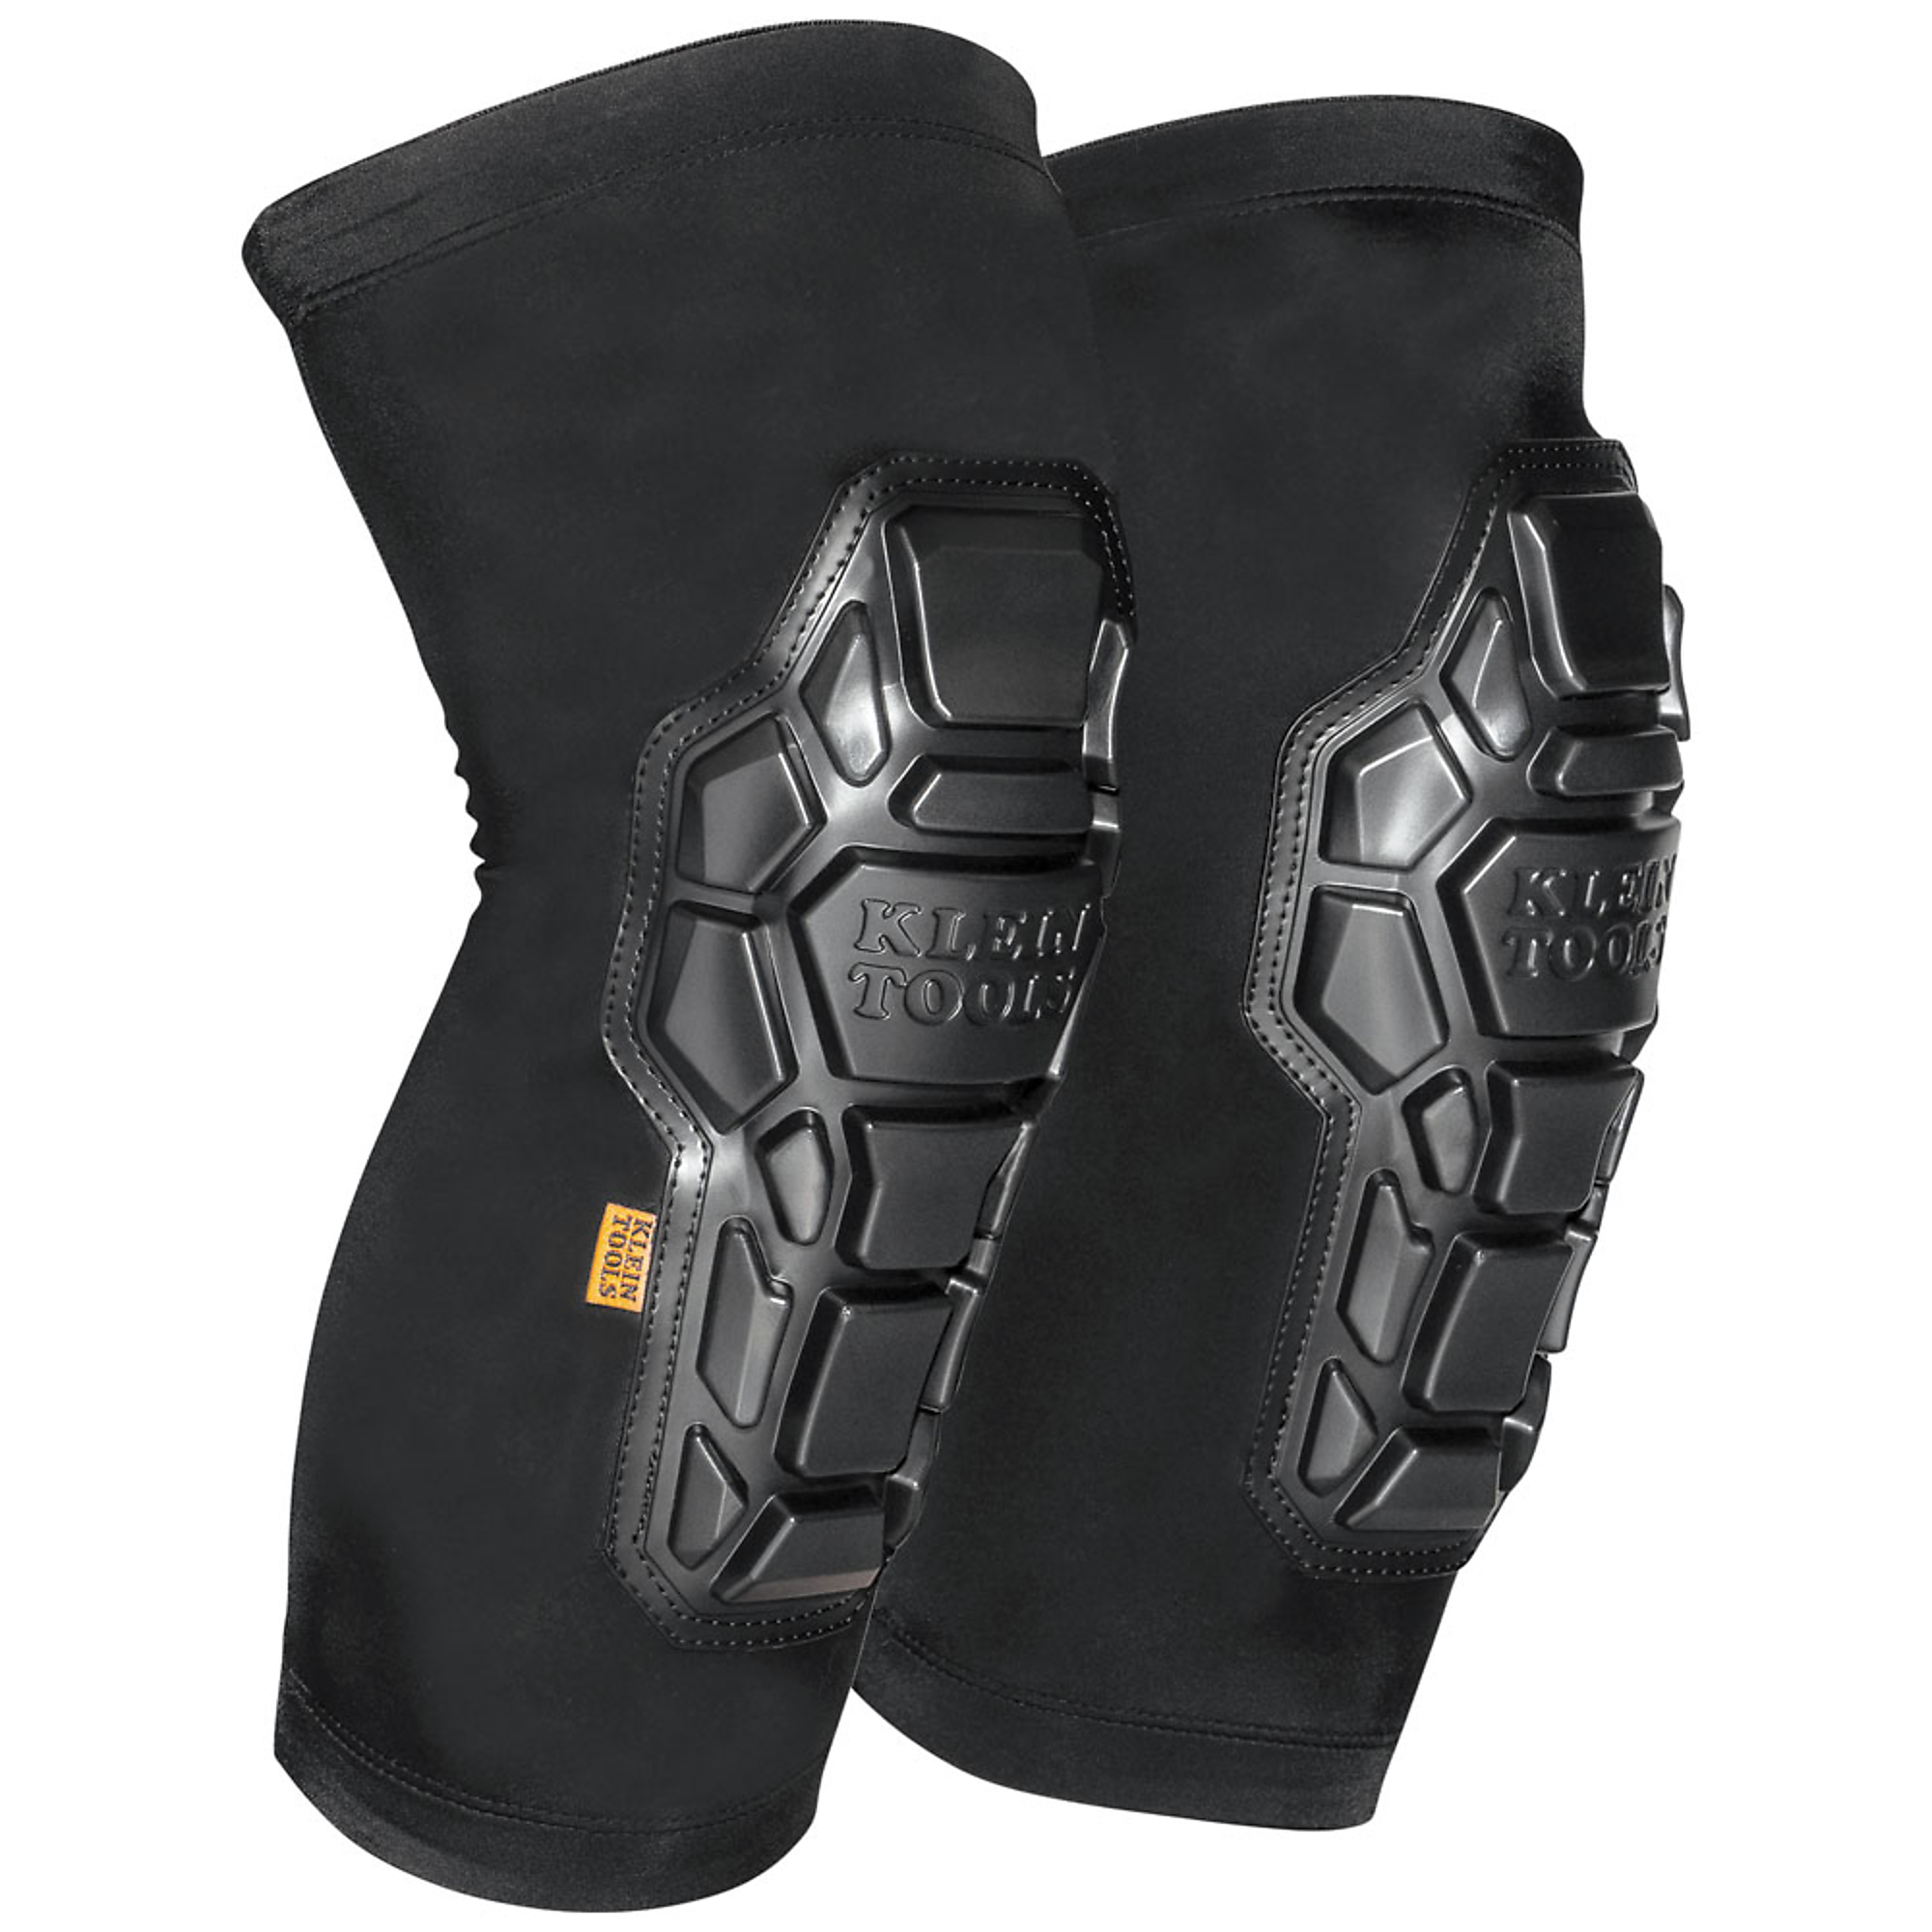 Klein Tools, Heavy Duty Knee Pad Sleeves, M/L, Included (qty.) 2 Color Black, Model 60511